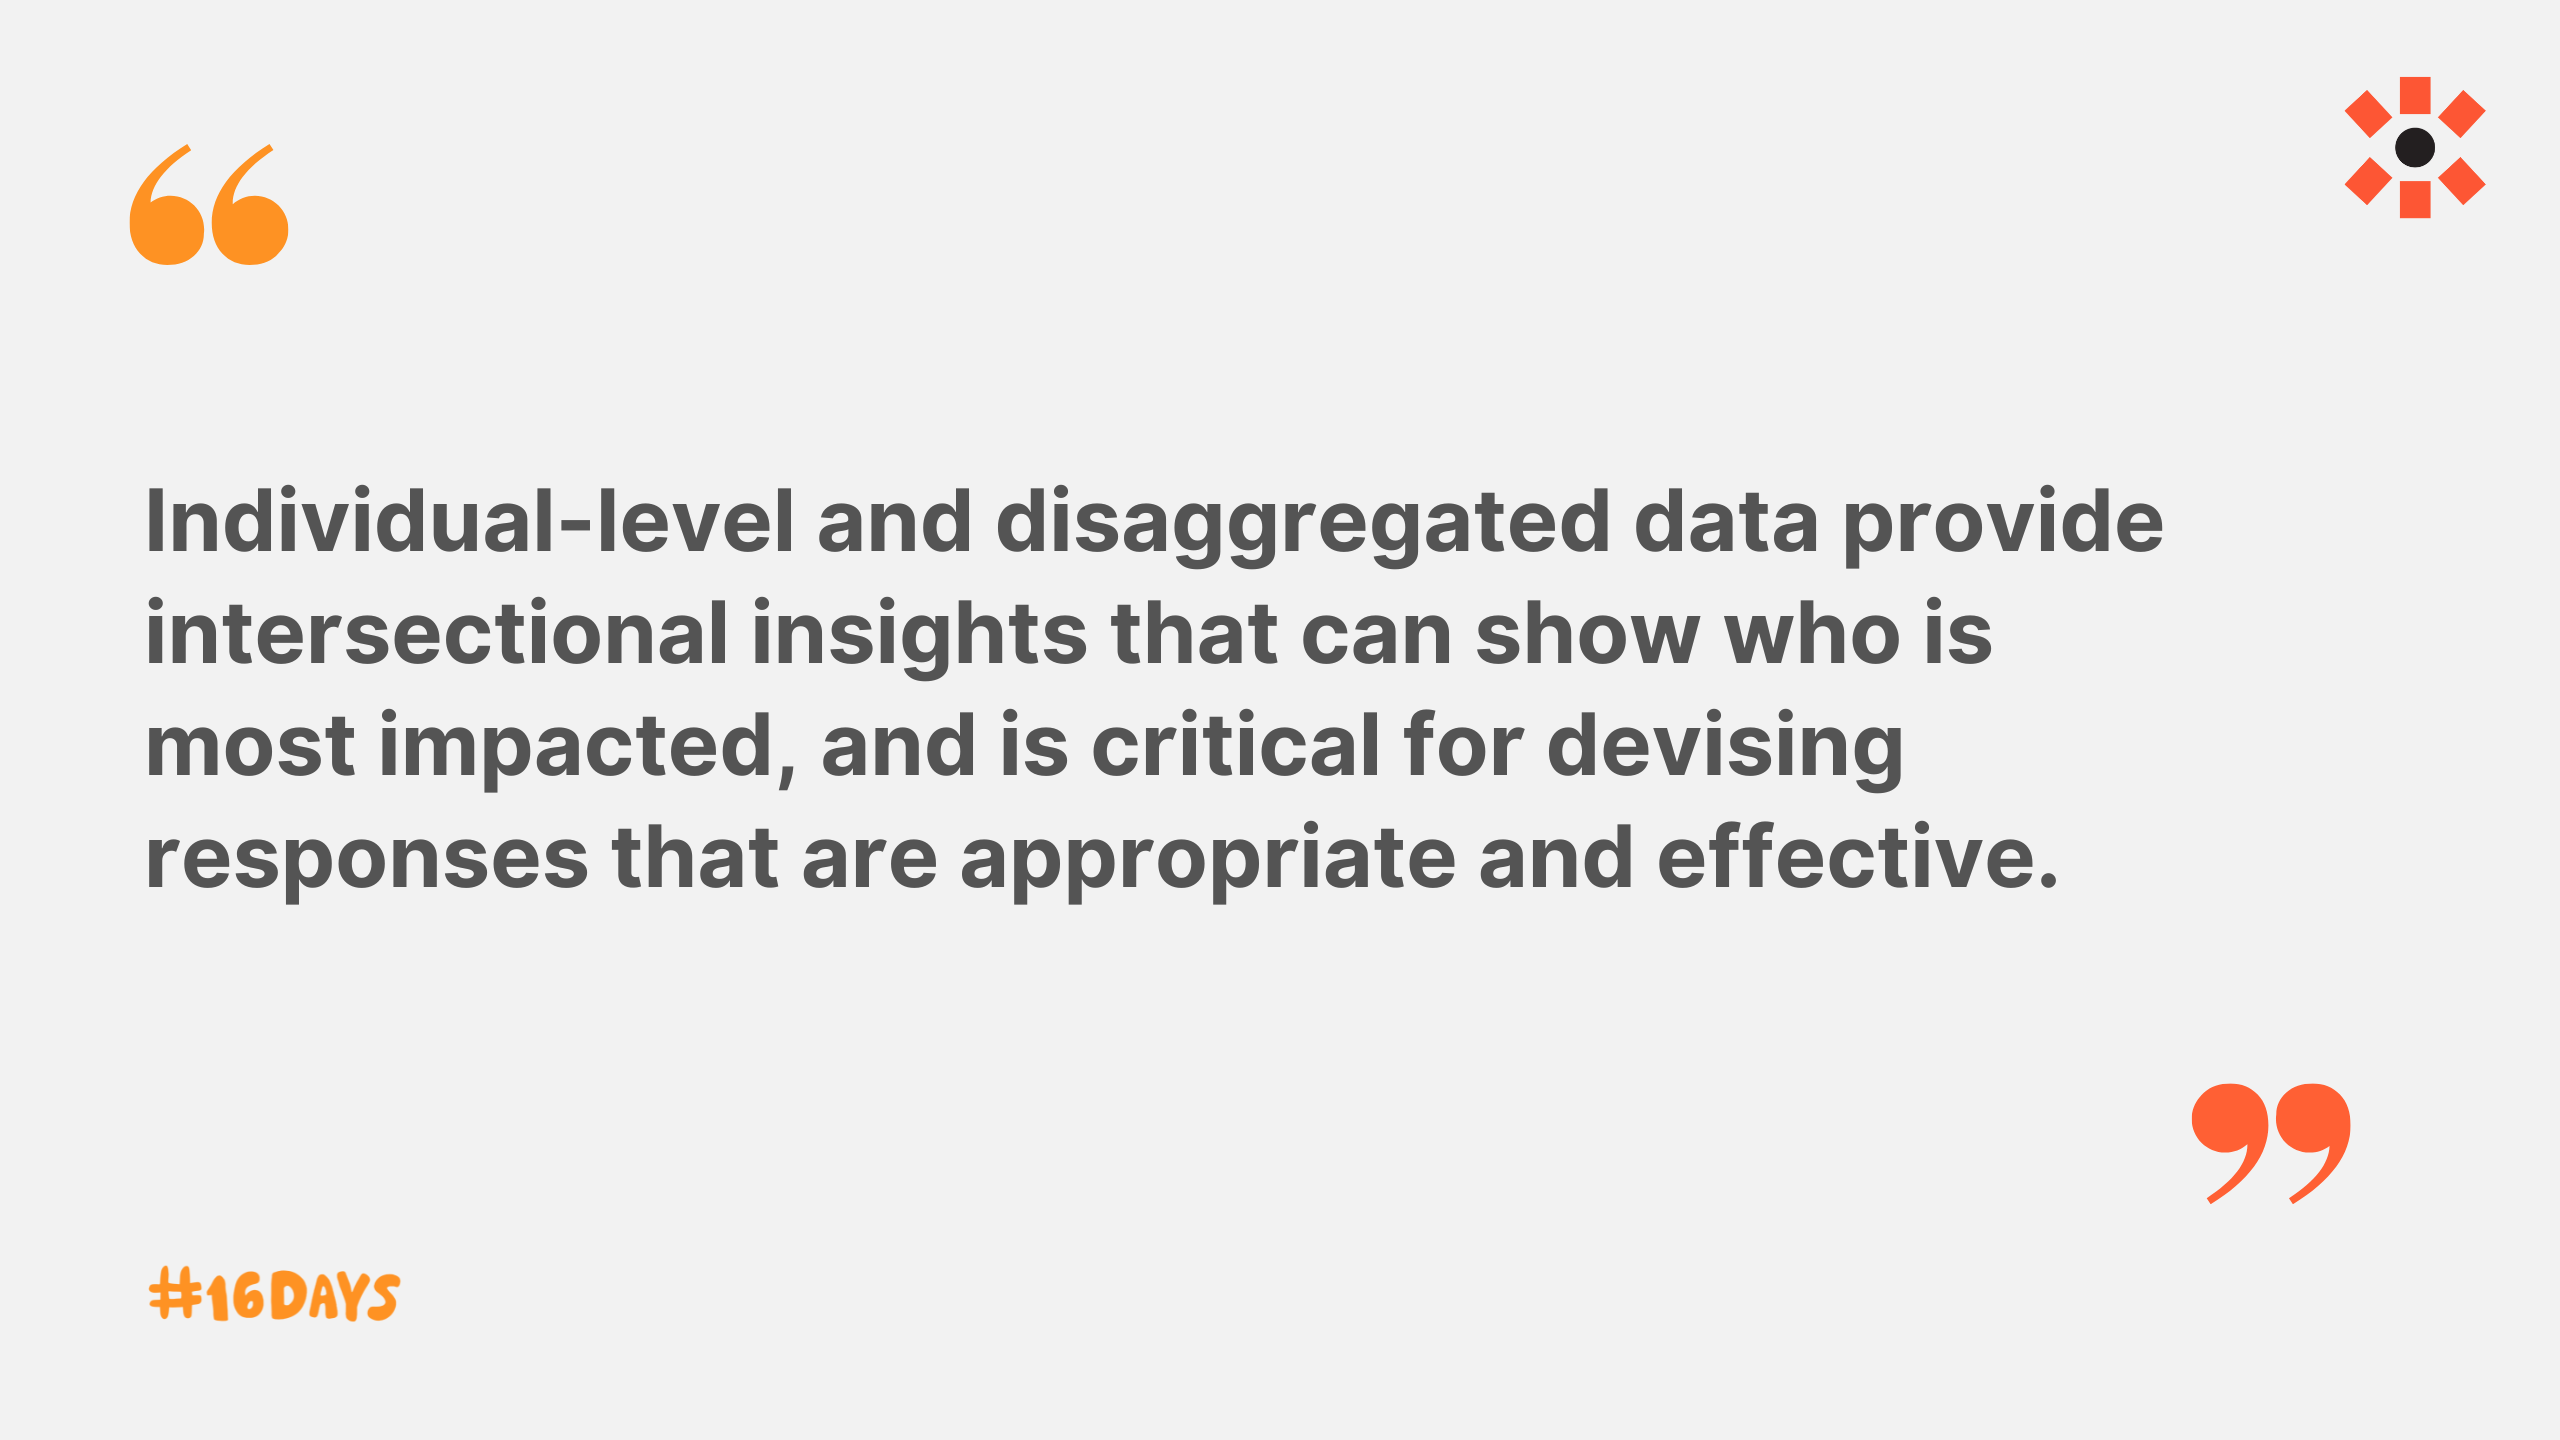 A quote in grey text that says "Individual-level and disaggregated data provide intersectional insights that can show who is most impacted, and is critical for devising responses that are appropriate and effective." There are orange quotation marks. 